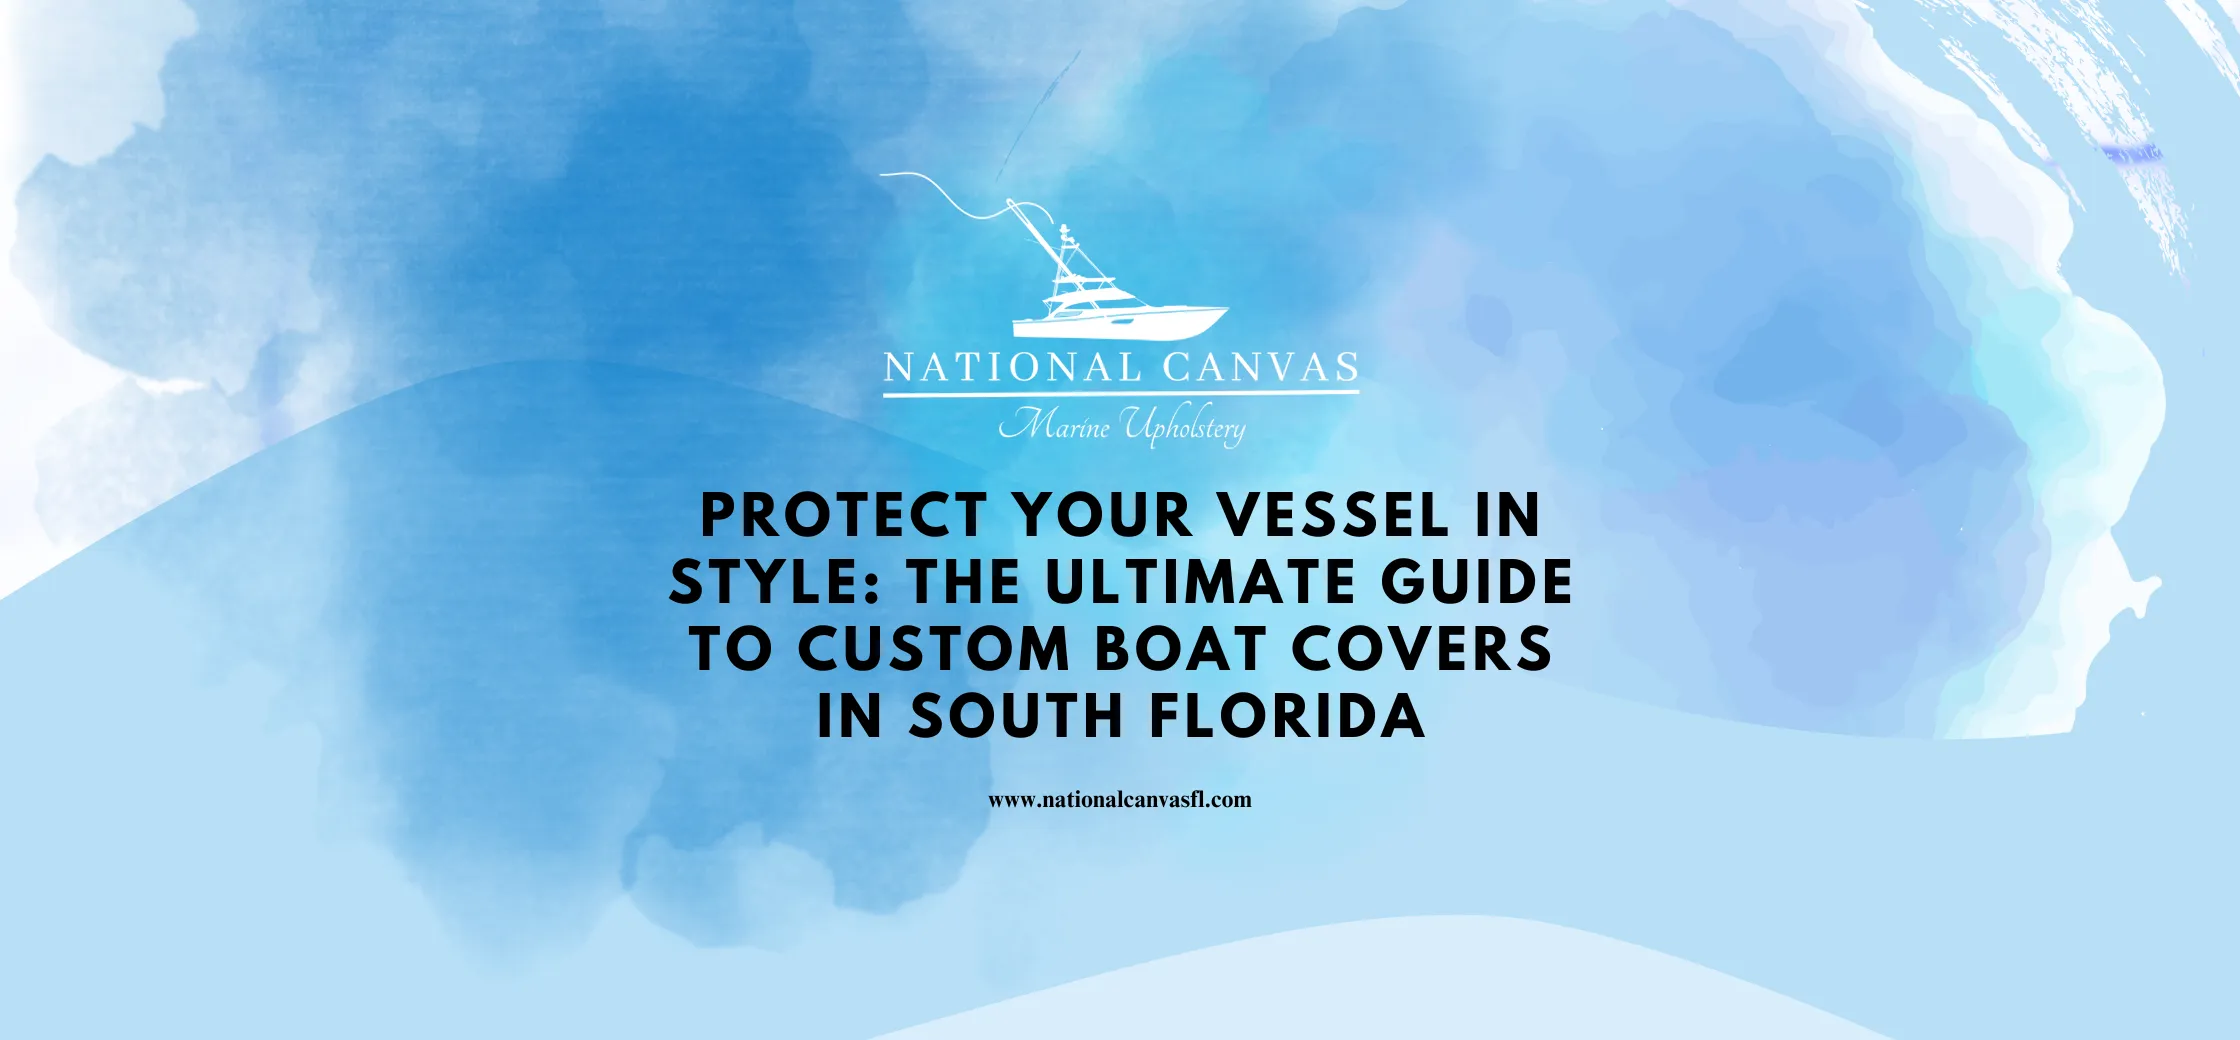 Protect Your Vessel in Style_ The Ultimate Guide to Custom Boat Covers in South Florida